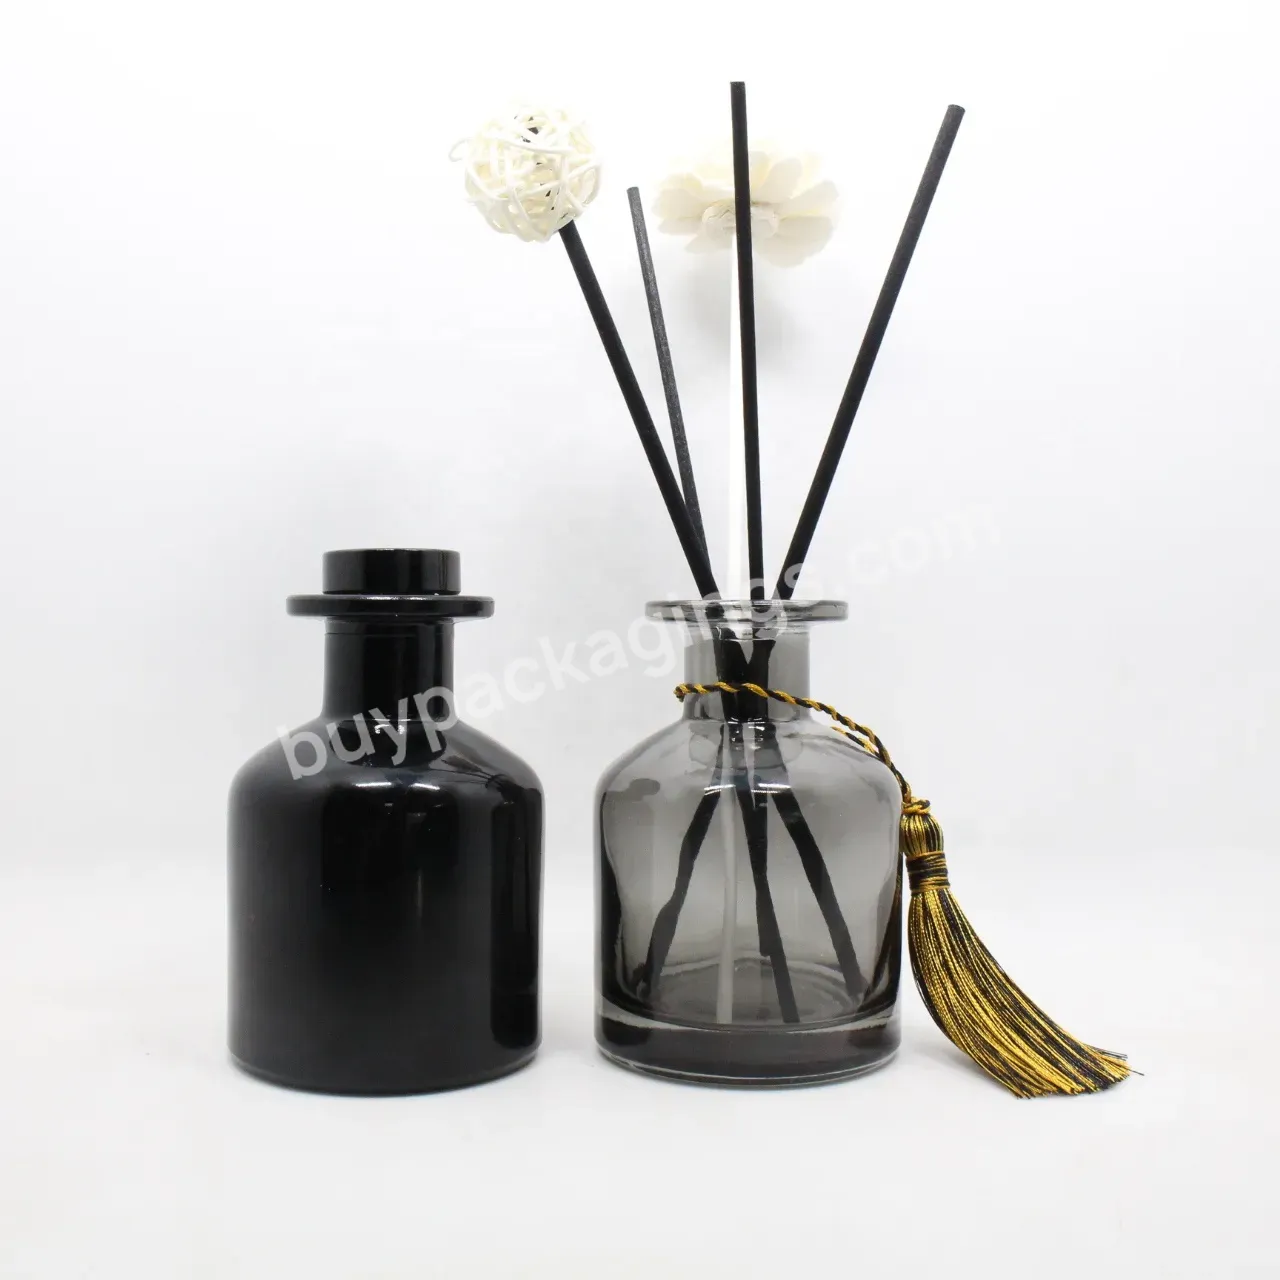 Wholesale 50ml 100ml 150ml 200ml Glass Reed Diffuser Bottle With Gold Cap Luxury Empty Glass Stick Bottle For Aroma Oil Diffuser - Buy Glass Empty Mini 150ml 300ml Aromatherapy Oil Reed Diffuser Bottles Set Car Wholesale,Wholesale Home Room Aroma Def